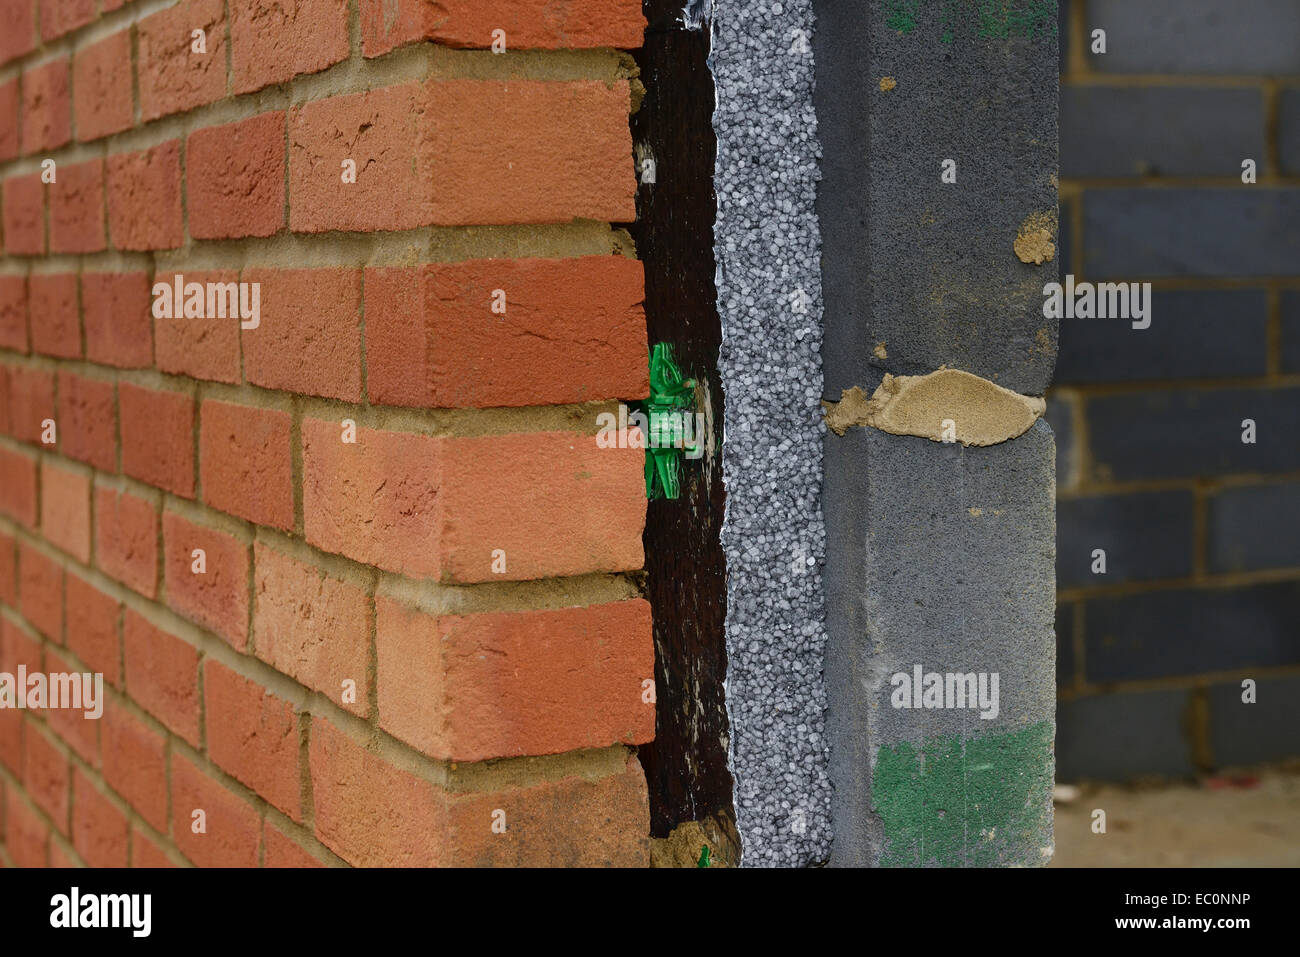 Cross section detail of a modern cavity wall on a house Stock Photo